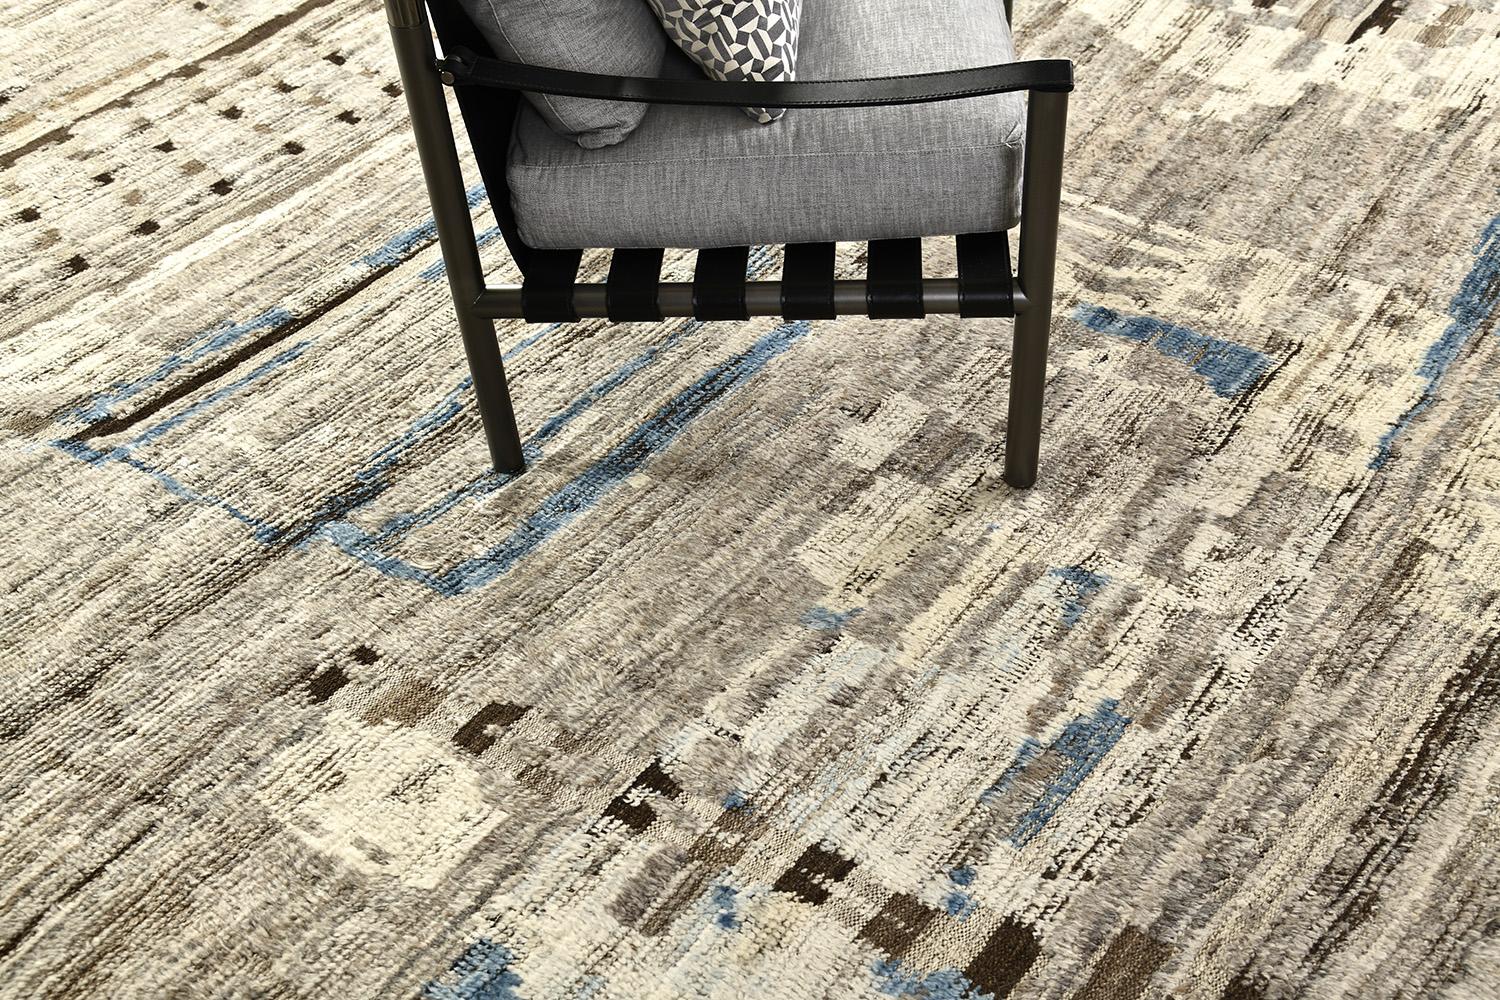 'Meliska' is an exquisitely textured rug with irregular motifs inspired from the Atlas Mountains of Morocco. Earthy tones of ivory and chocolate brown surrounded by umber brown shag work cohesively to make for a great contemporary interpretation for